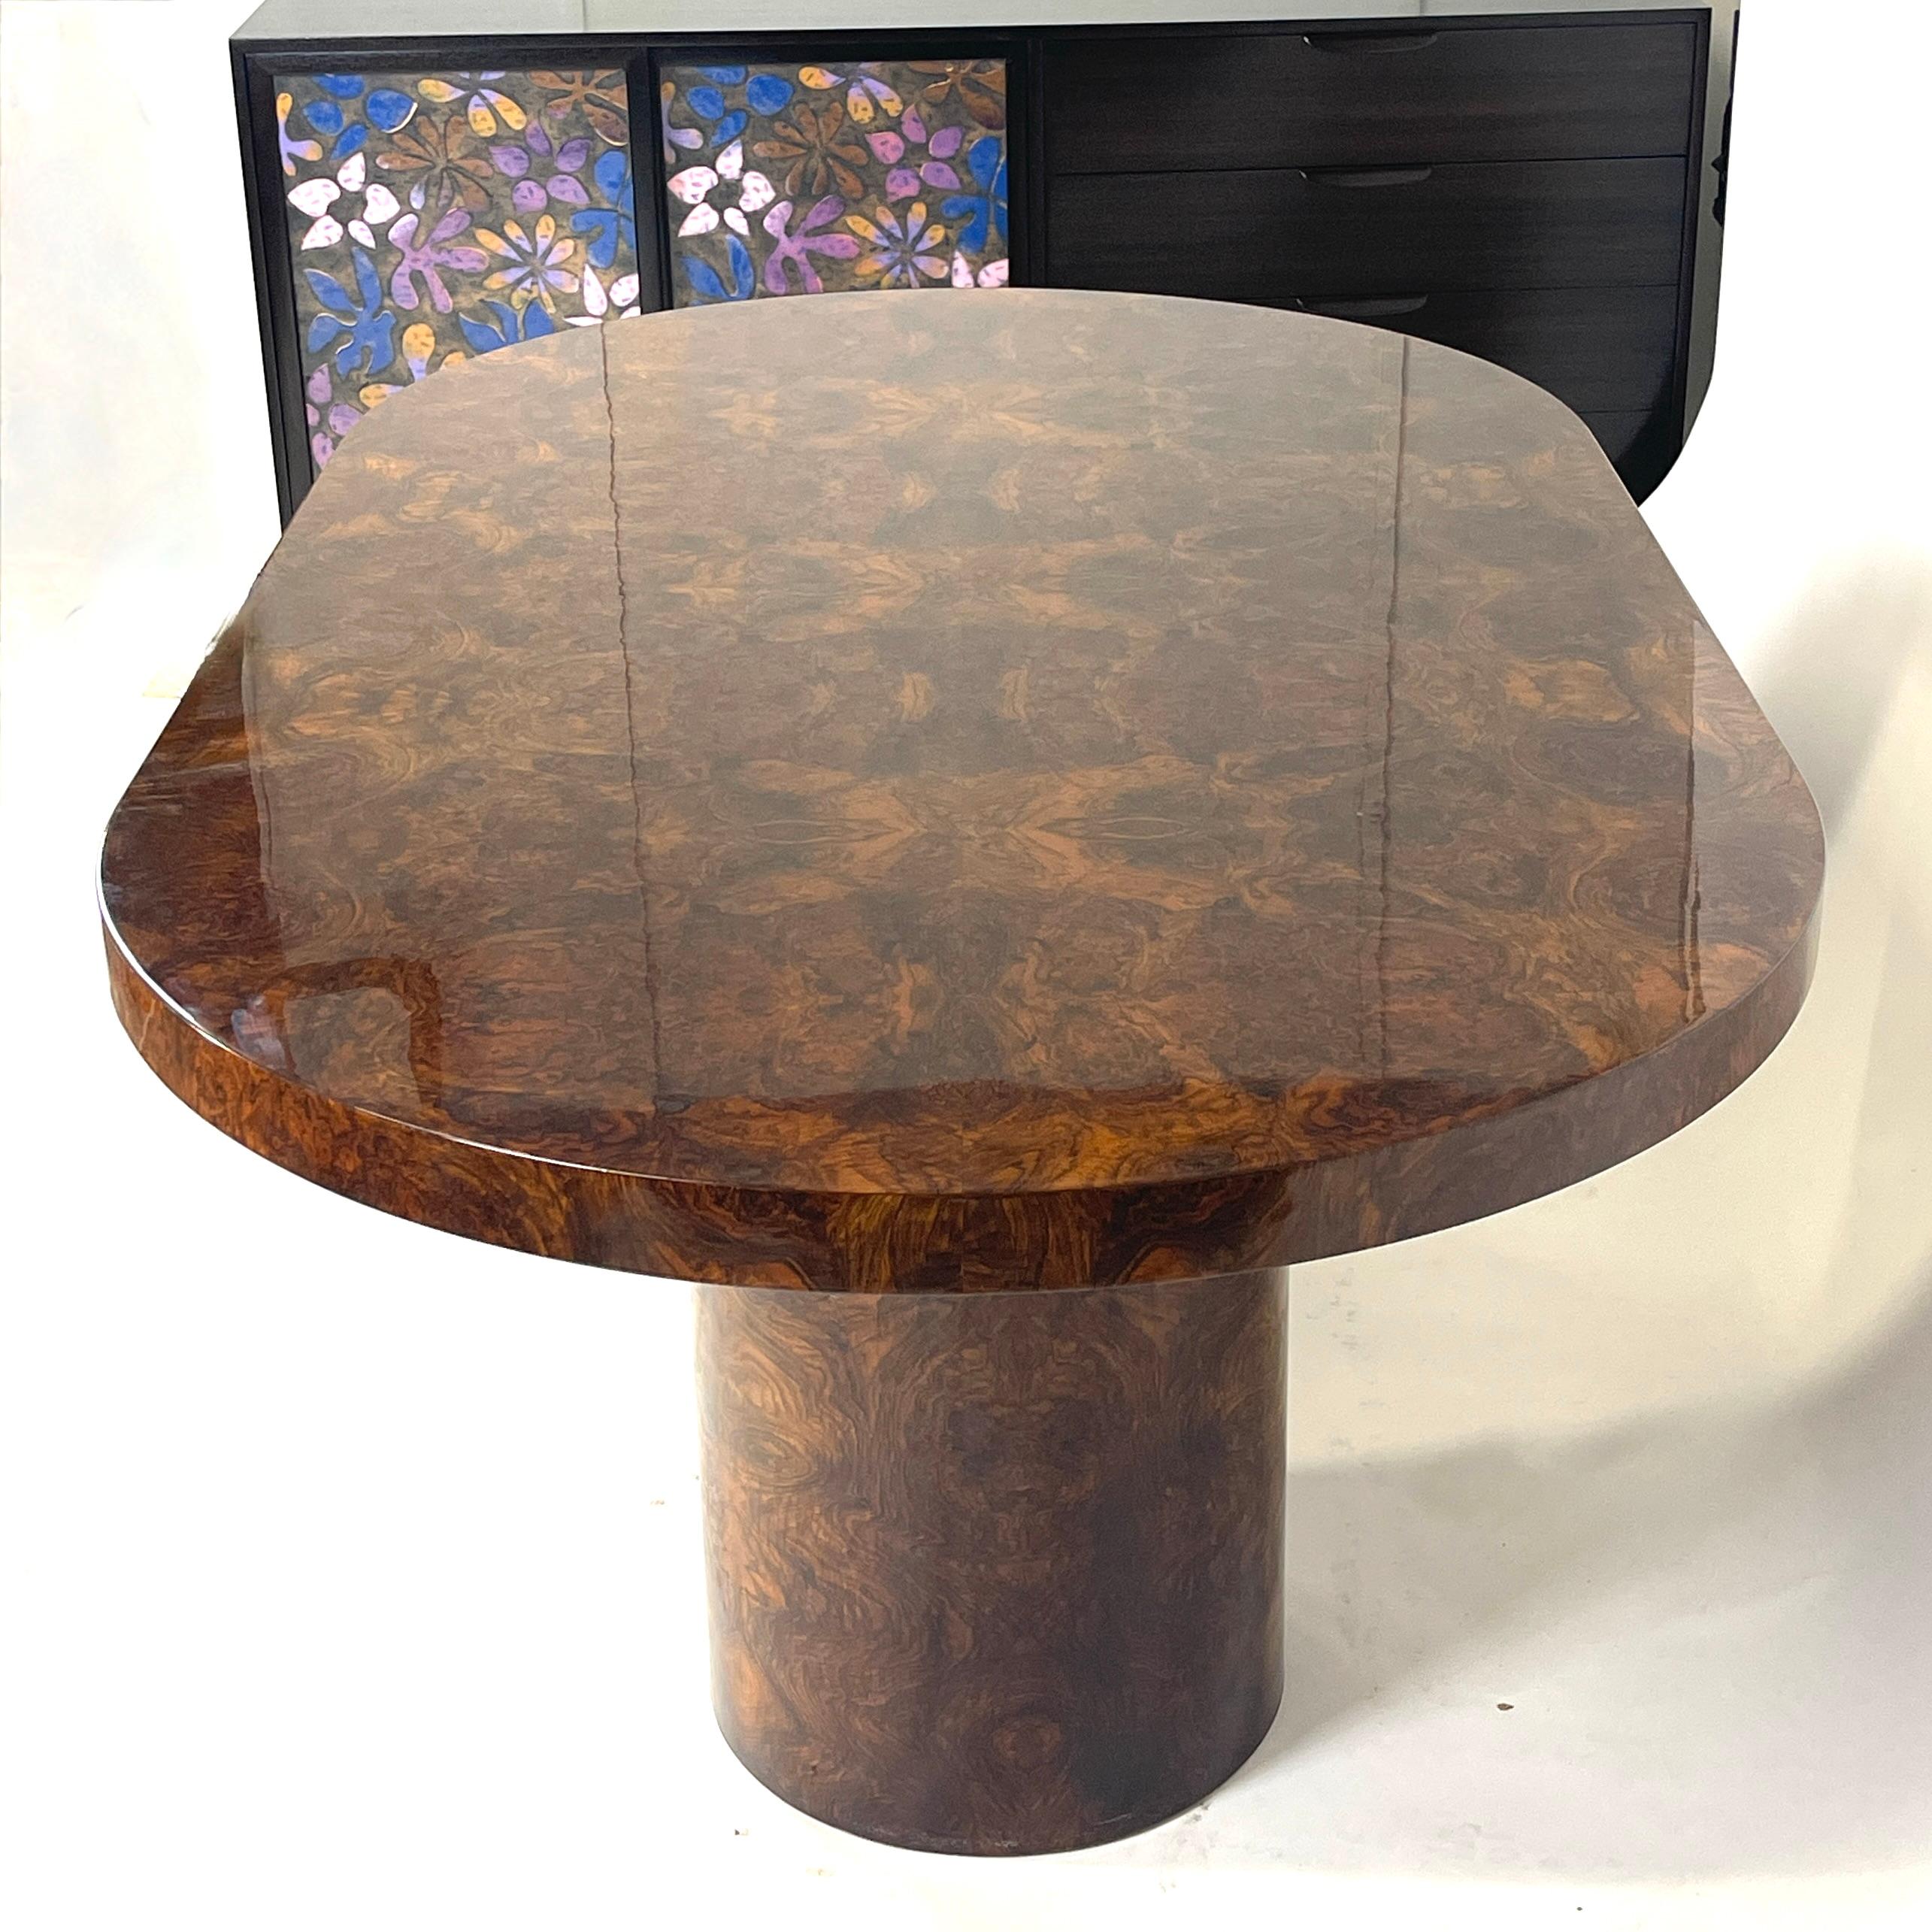 Lacquered Burled Mahogany Oval Dining Table by Paul Mayen for Intrex Habitat 1